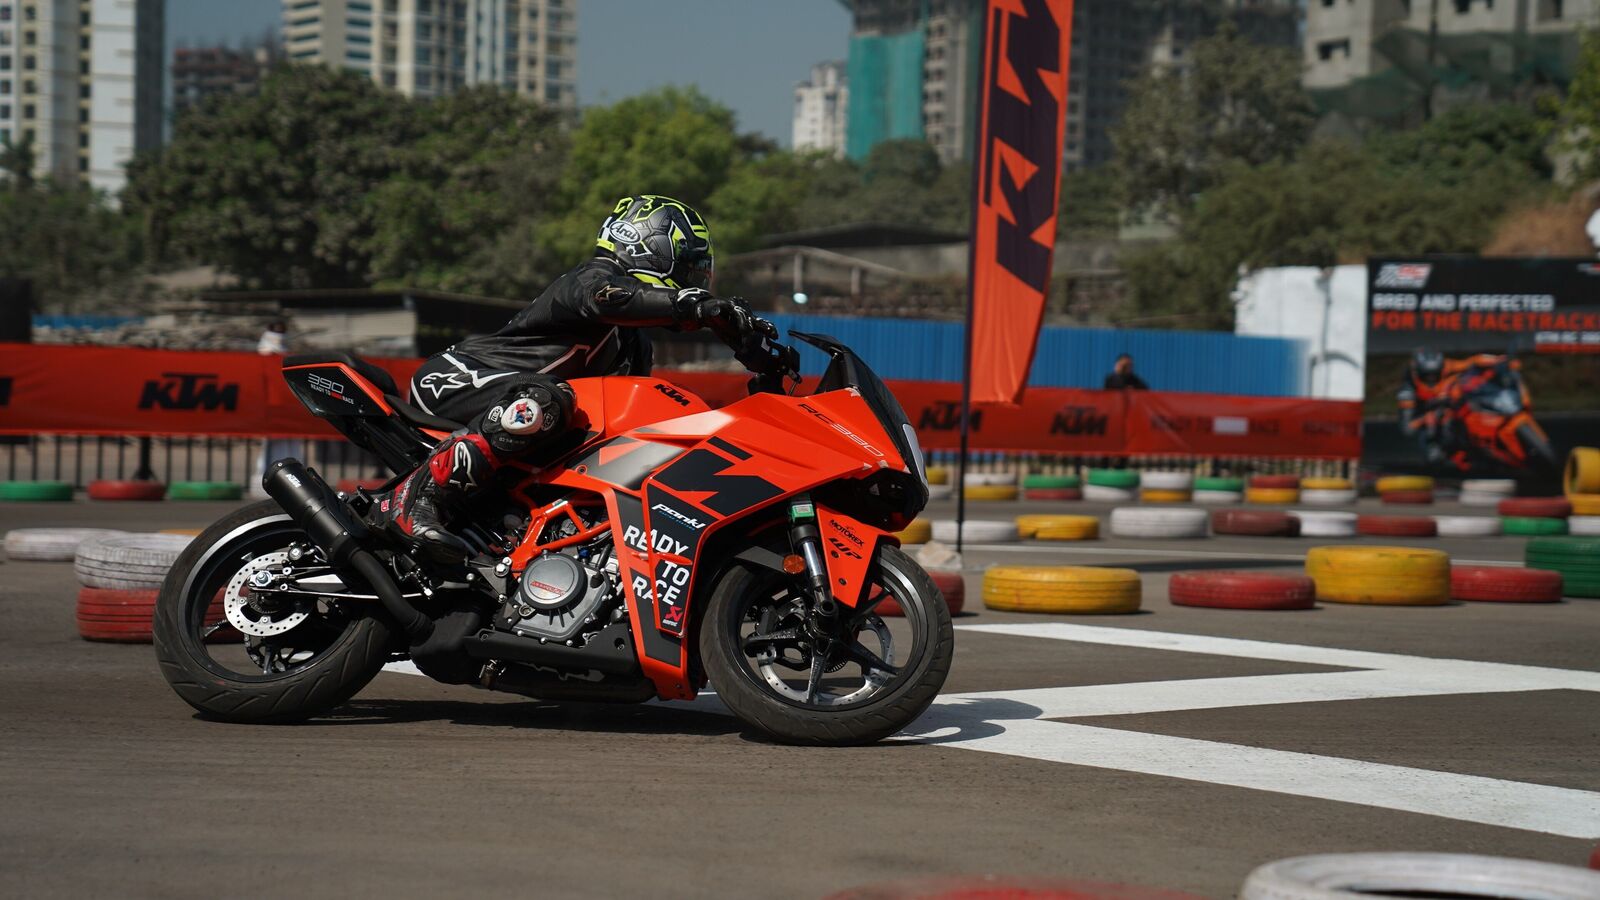 2023 KTM RC Cup racing championship kicks off in India | HT Auto